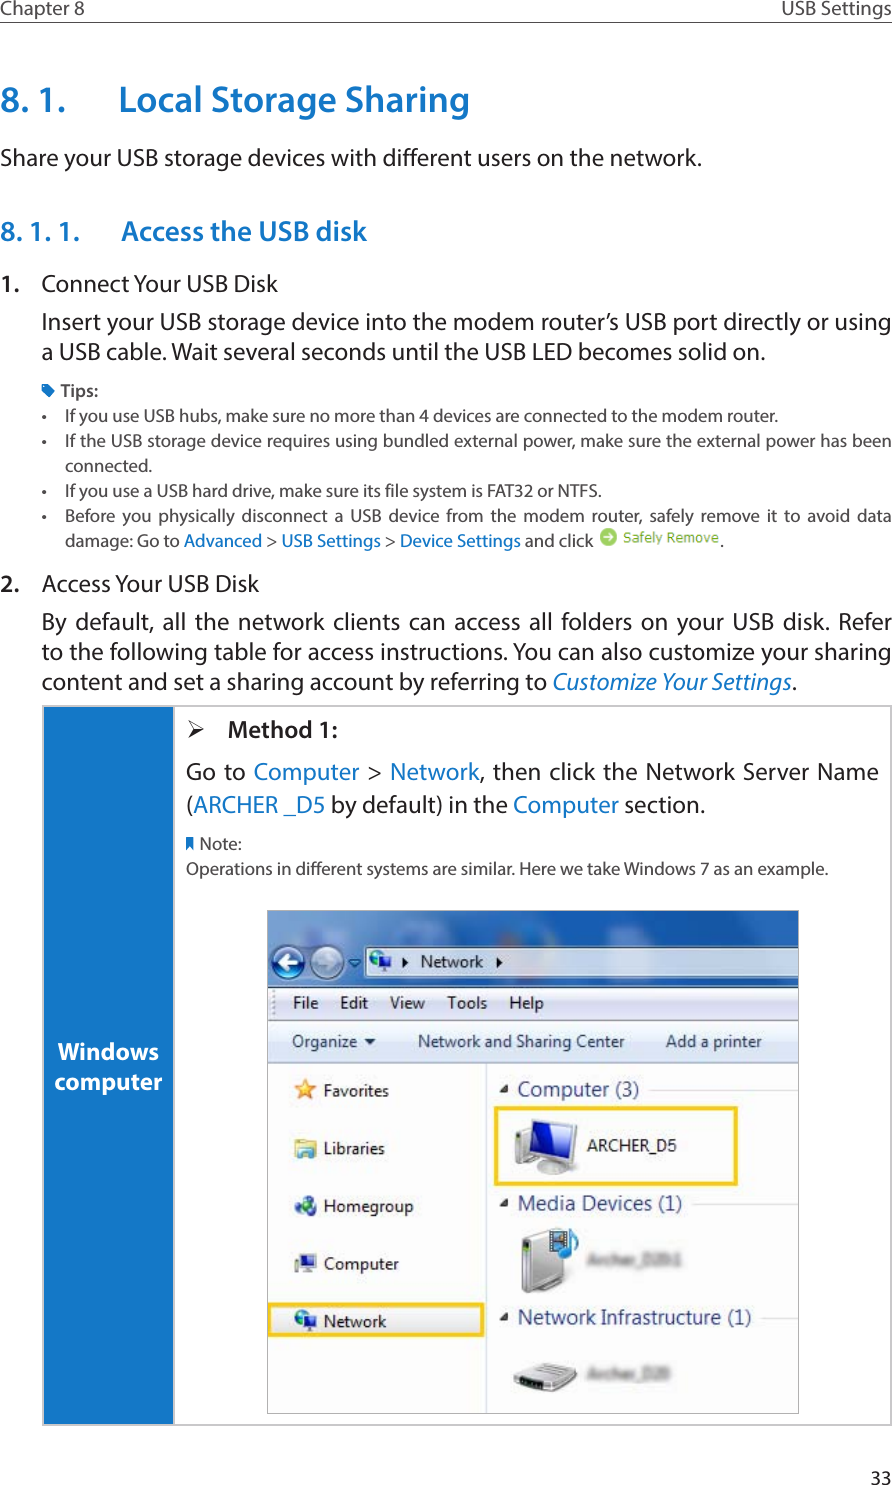 33Chapter 8 USB Settings8. 1.  Local Storage SharingShare your USB storage devices with different users on the network.8. 1. 1.  Access the USB disk1.  Connect Your USB DiskInsert your USB storage device into the modem router’s USB port directly or using a USB cable. Wait several seconds until the USB LED becomes solid on.Tips:•  If you use USB hubs, make sure no more than 4 devices are connected to the modem router.•  If the USB storage device requires using bundled external power, make sure the external power has been connected.•  If you use a USB hard drive, make sure its file system is FAT32 or NTFS.•  Before you physically disconnect a USB device from the modem router, safely remove it to avoid data damage: Go to Advanced &gt; USB Settings &gt; Device Settings and click  .2.  Access Your USB DiskBy default, all the network clients can access all folders on your USB disk. Refer to the following table for access instructions. You can also customize your sharing content and set a sharing account by referring to Customize Your Settings.Windows computer ¾Method 1:Go to Computer &gt; Network, then click the Network Server Name (ARCHER _D5 by default) in the Computer section.Note:Operations in different systems are similar. Here we take Windows 7 as an example.